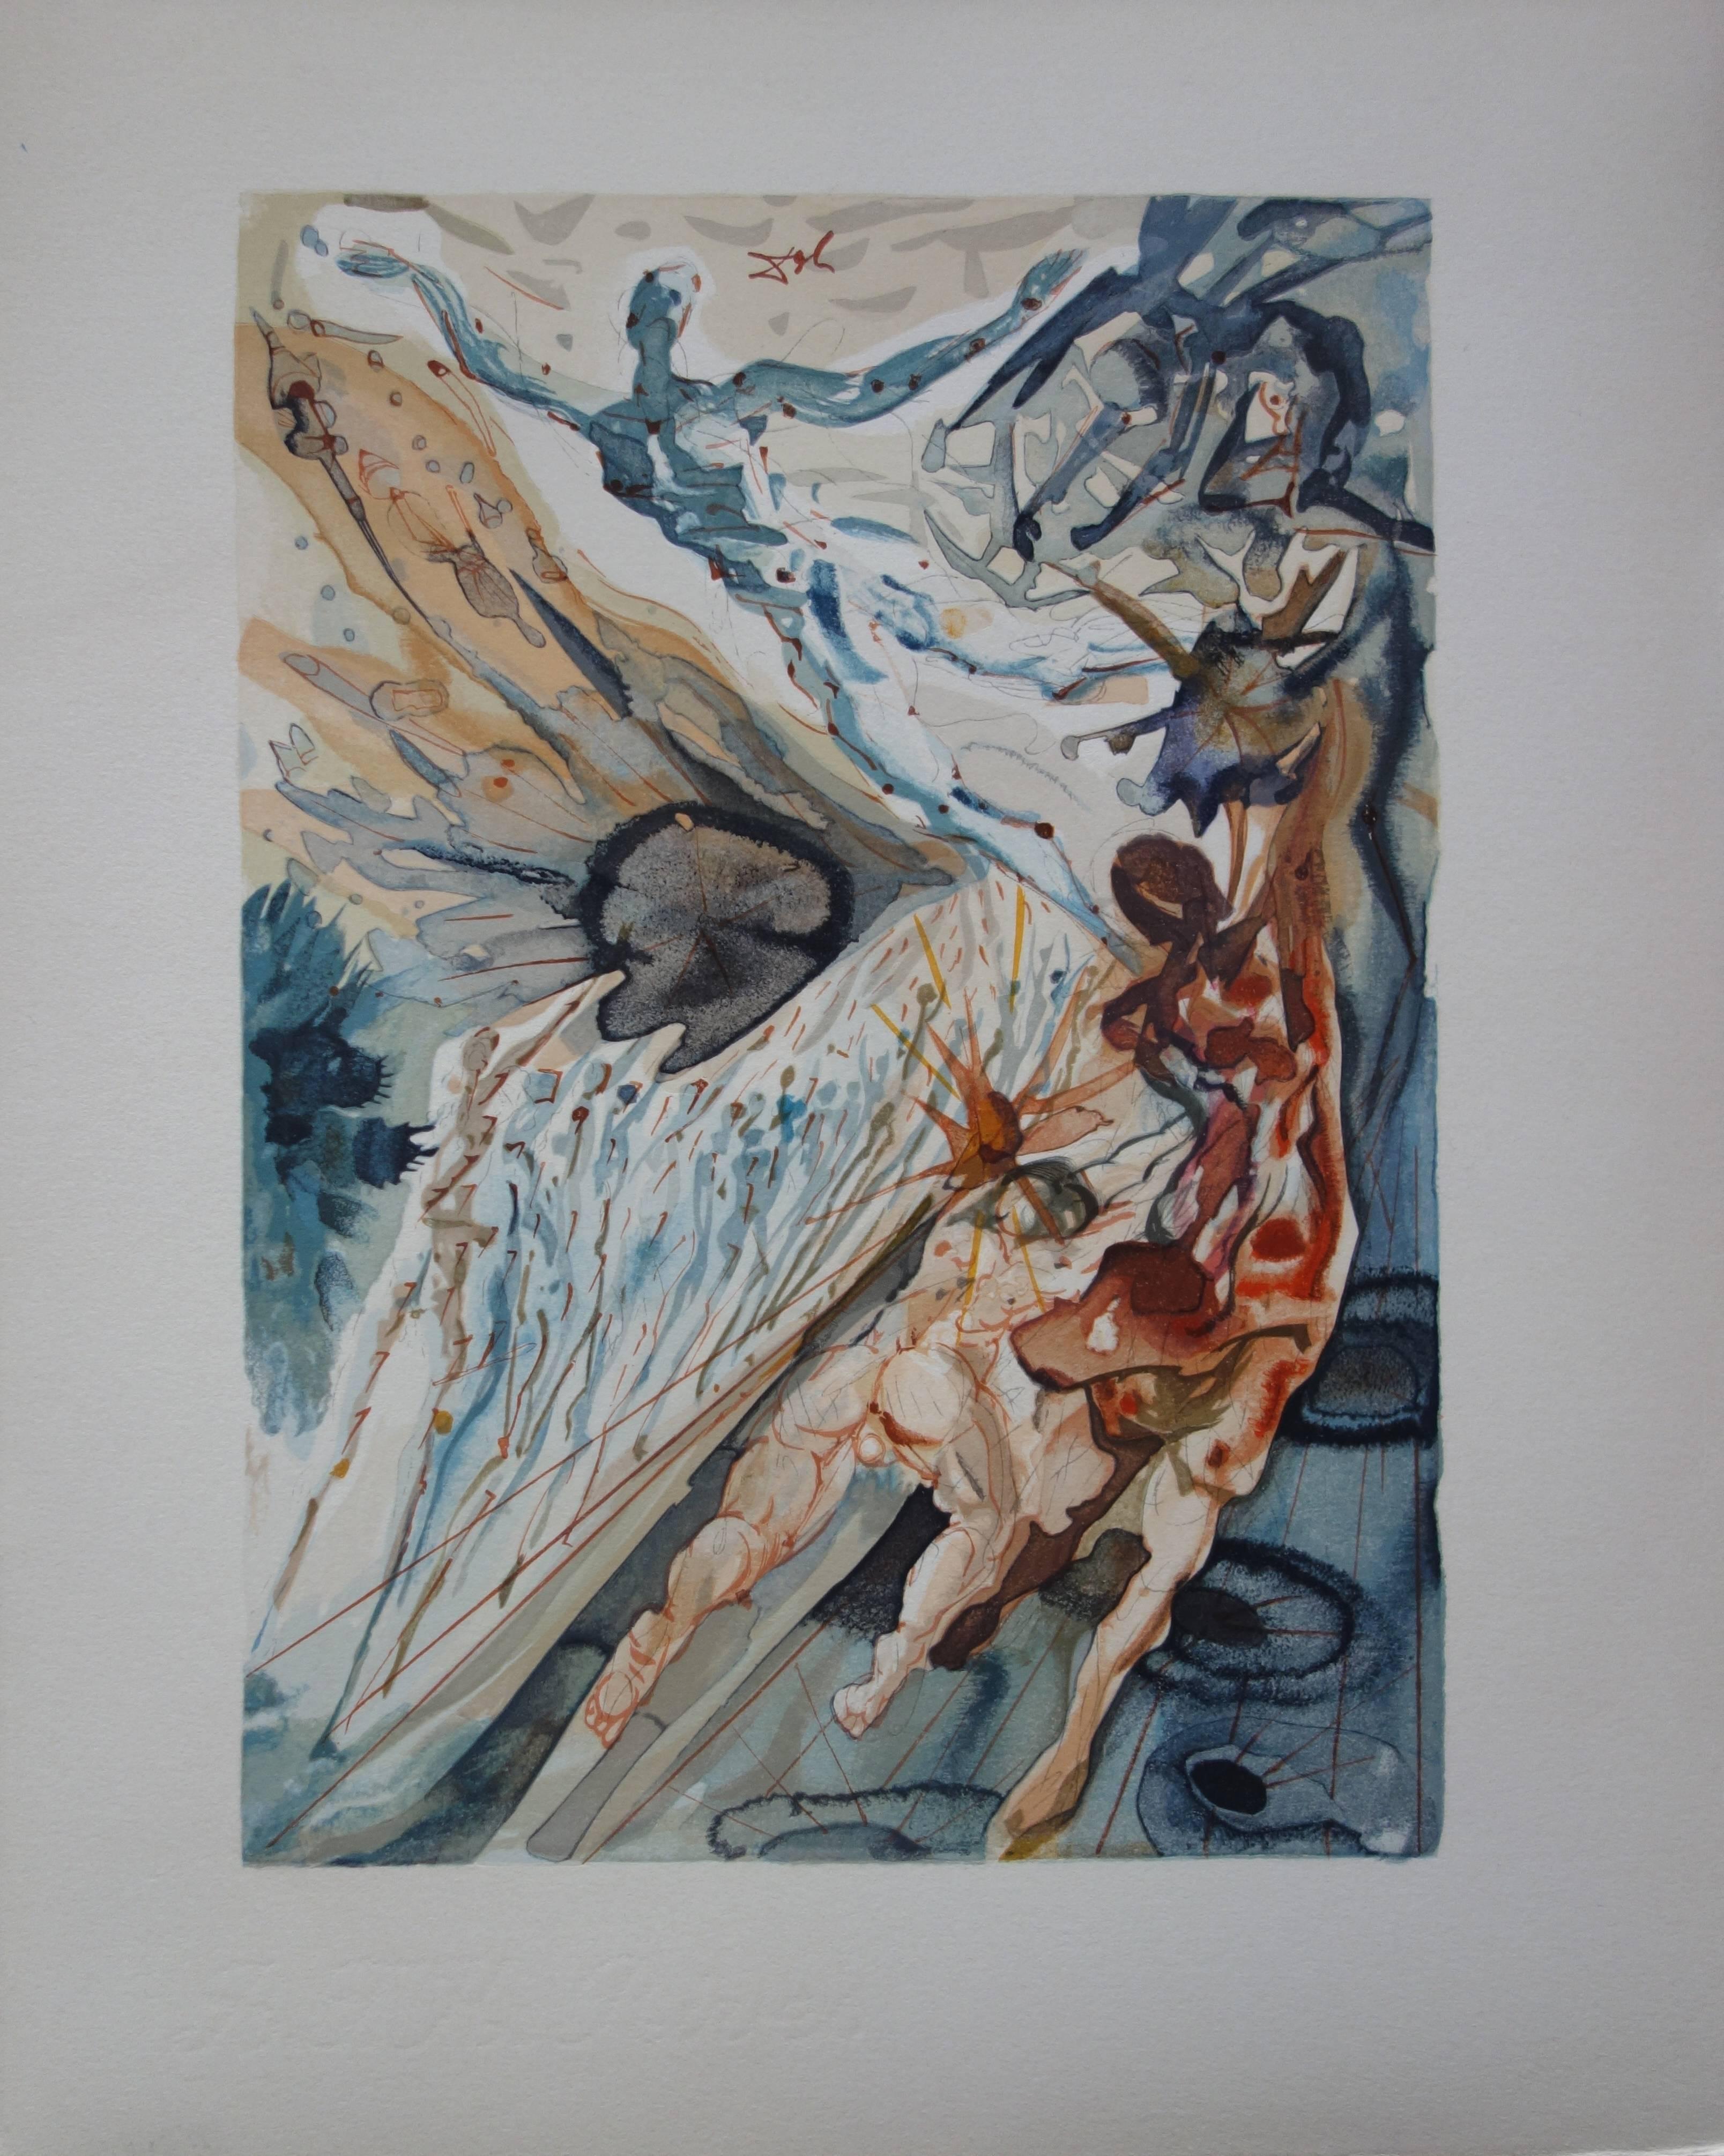 Salvador Dalí Figurative Print - Purgatory 26 - Encounter with Two Groups of the Lusty - Color woodcut